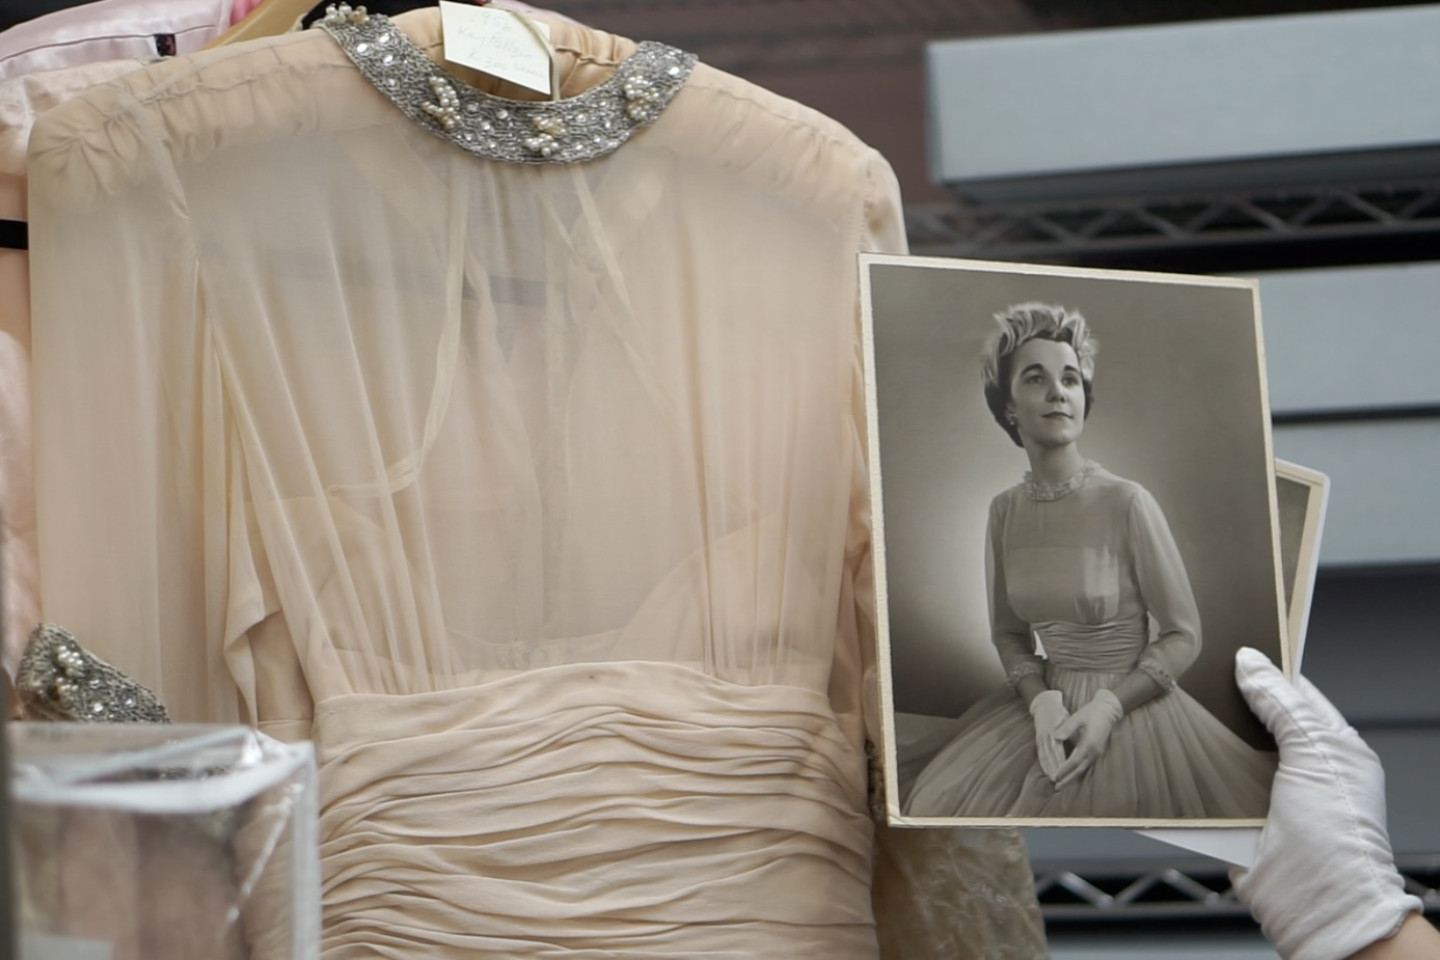 A wedding dress donated by the niece of a WMU alumna.